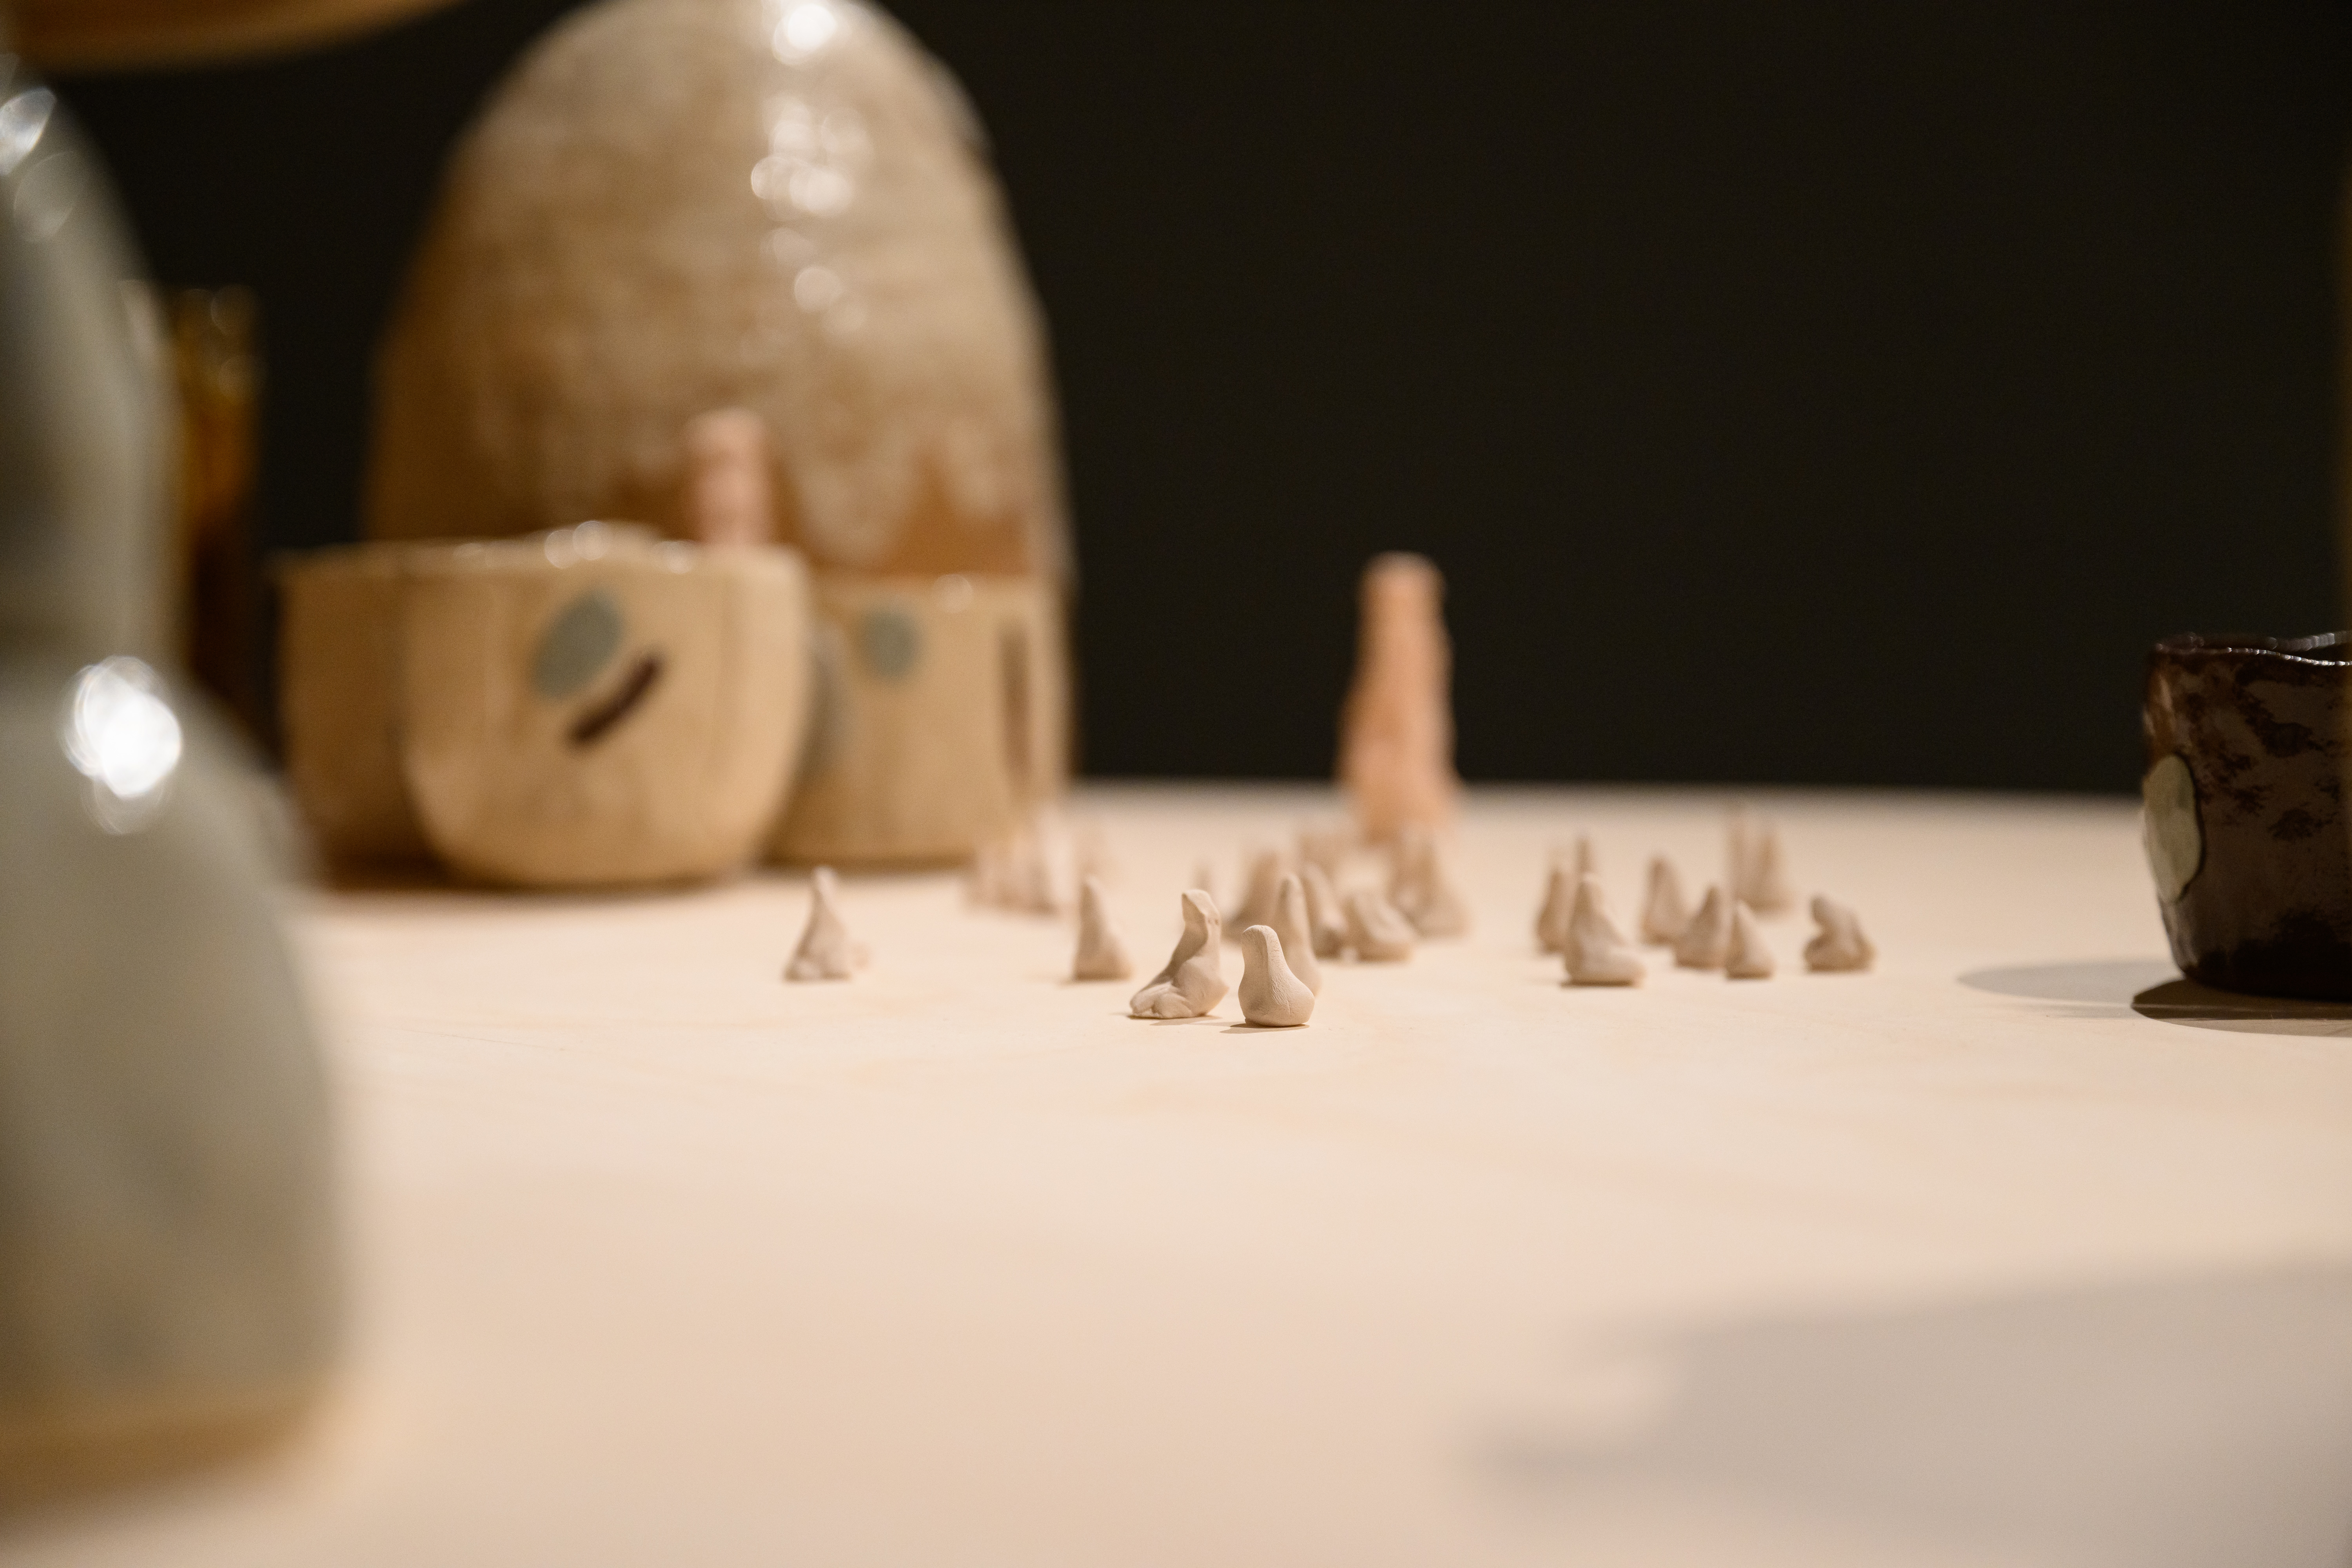 Close up of table surface, with little ceramic critters grouped together